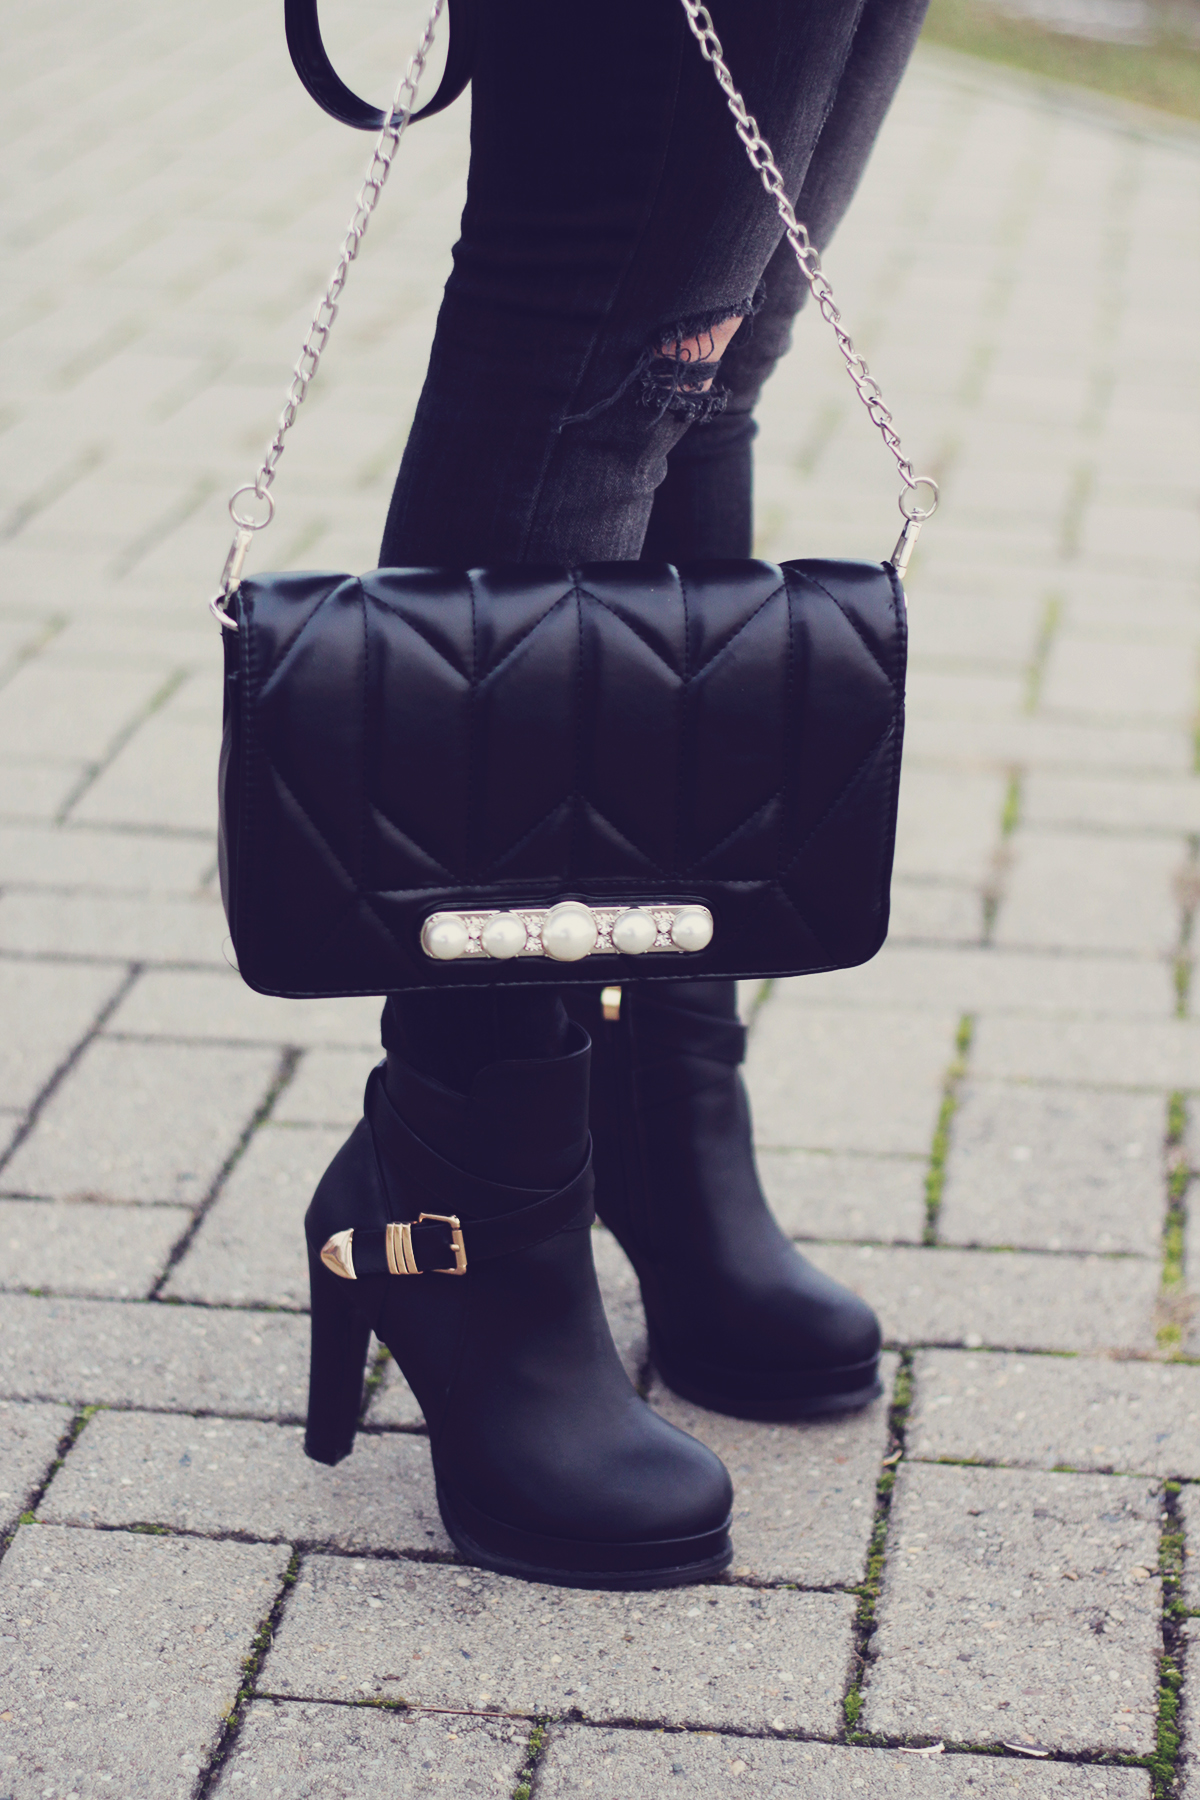 winter fashion, high boots, chevron bag with pearl detailing